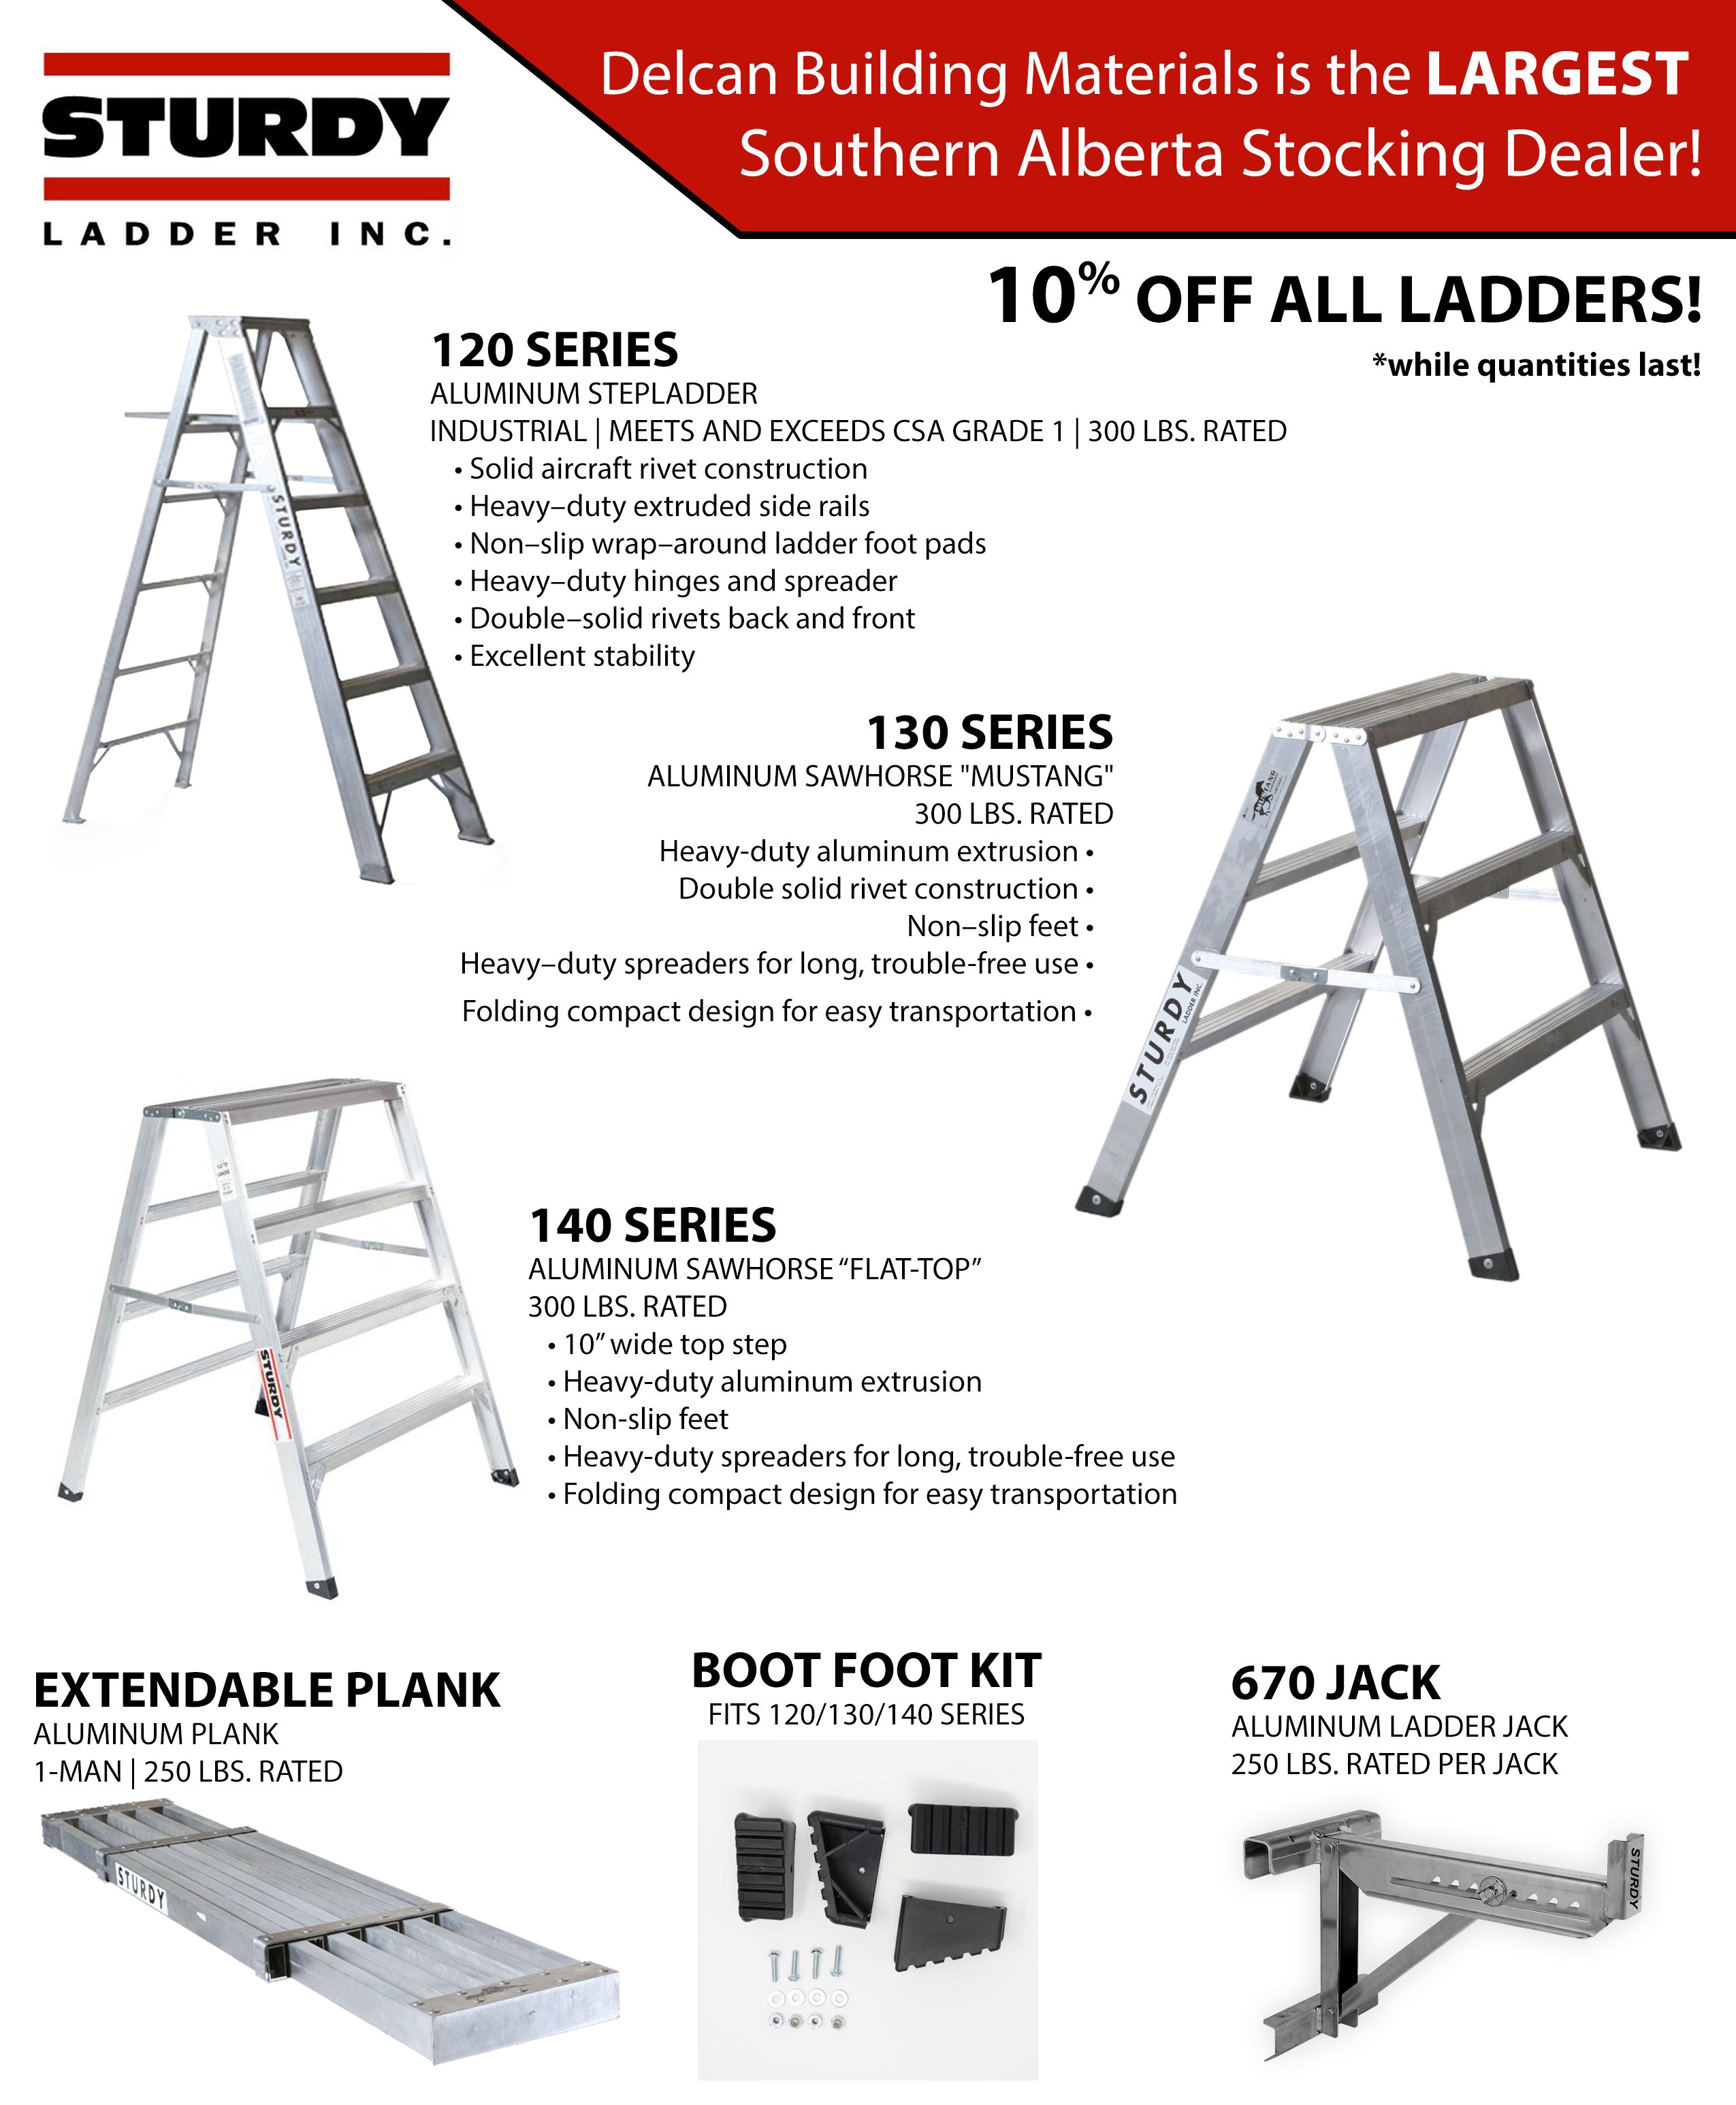 3' Sturdy Ladders 130 Aluminum Sawhorse Ladder Mustang 300 lb Rated 